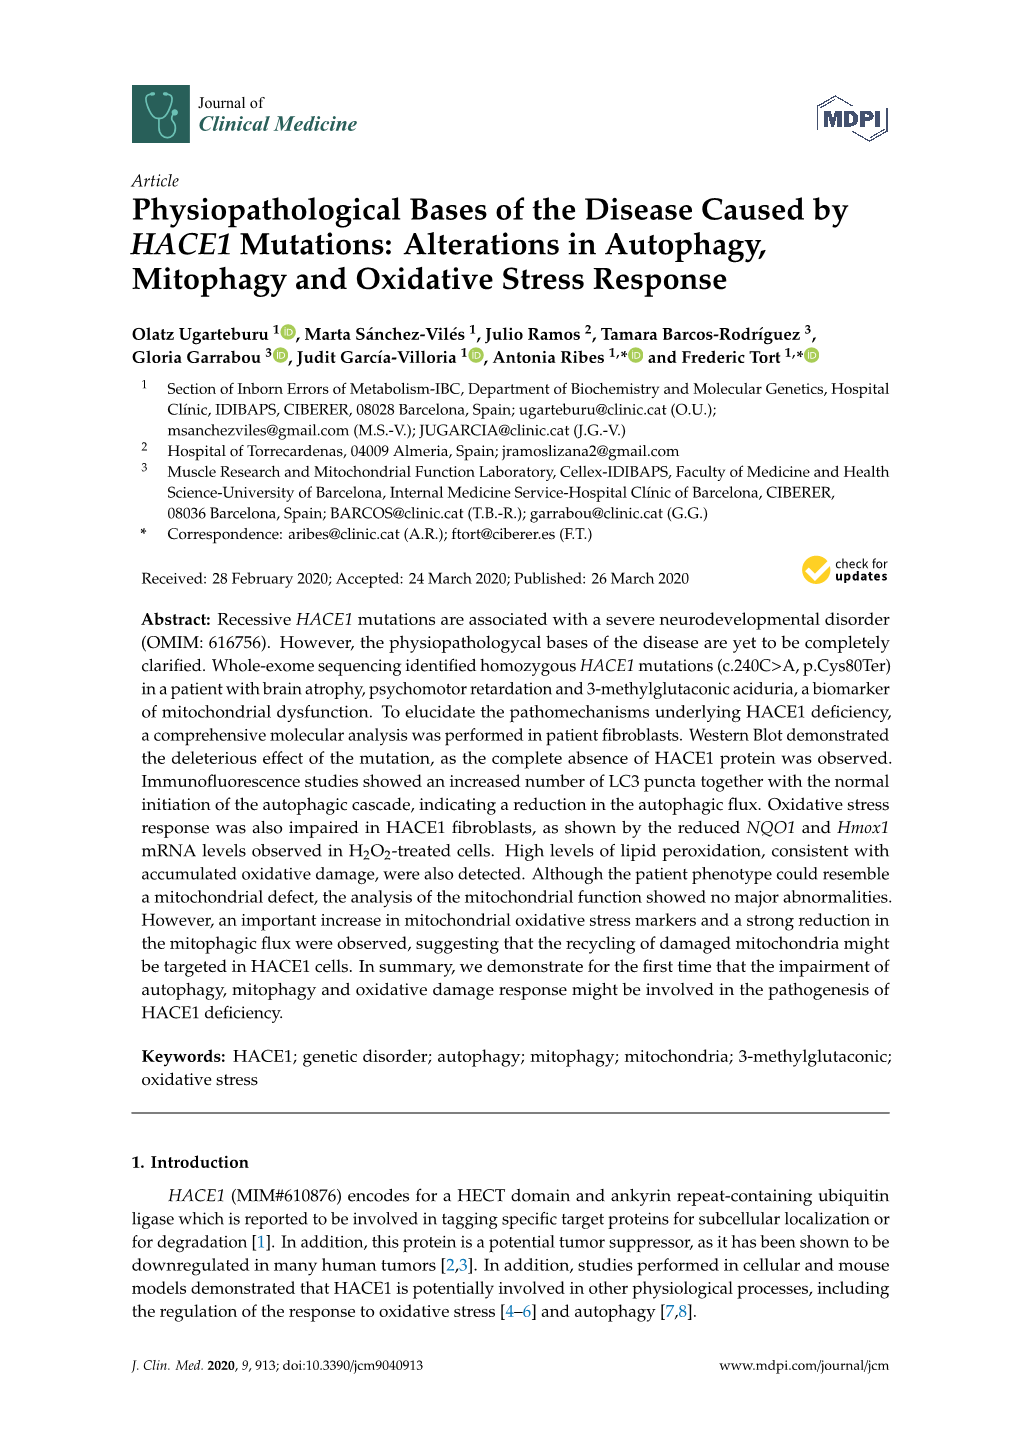 Physiopathological Bases of the Disease Caused by HACE1 Mutations: Alterations in Autophagy, Mitophagy and Oxidative Stress Response